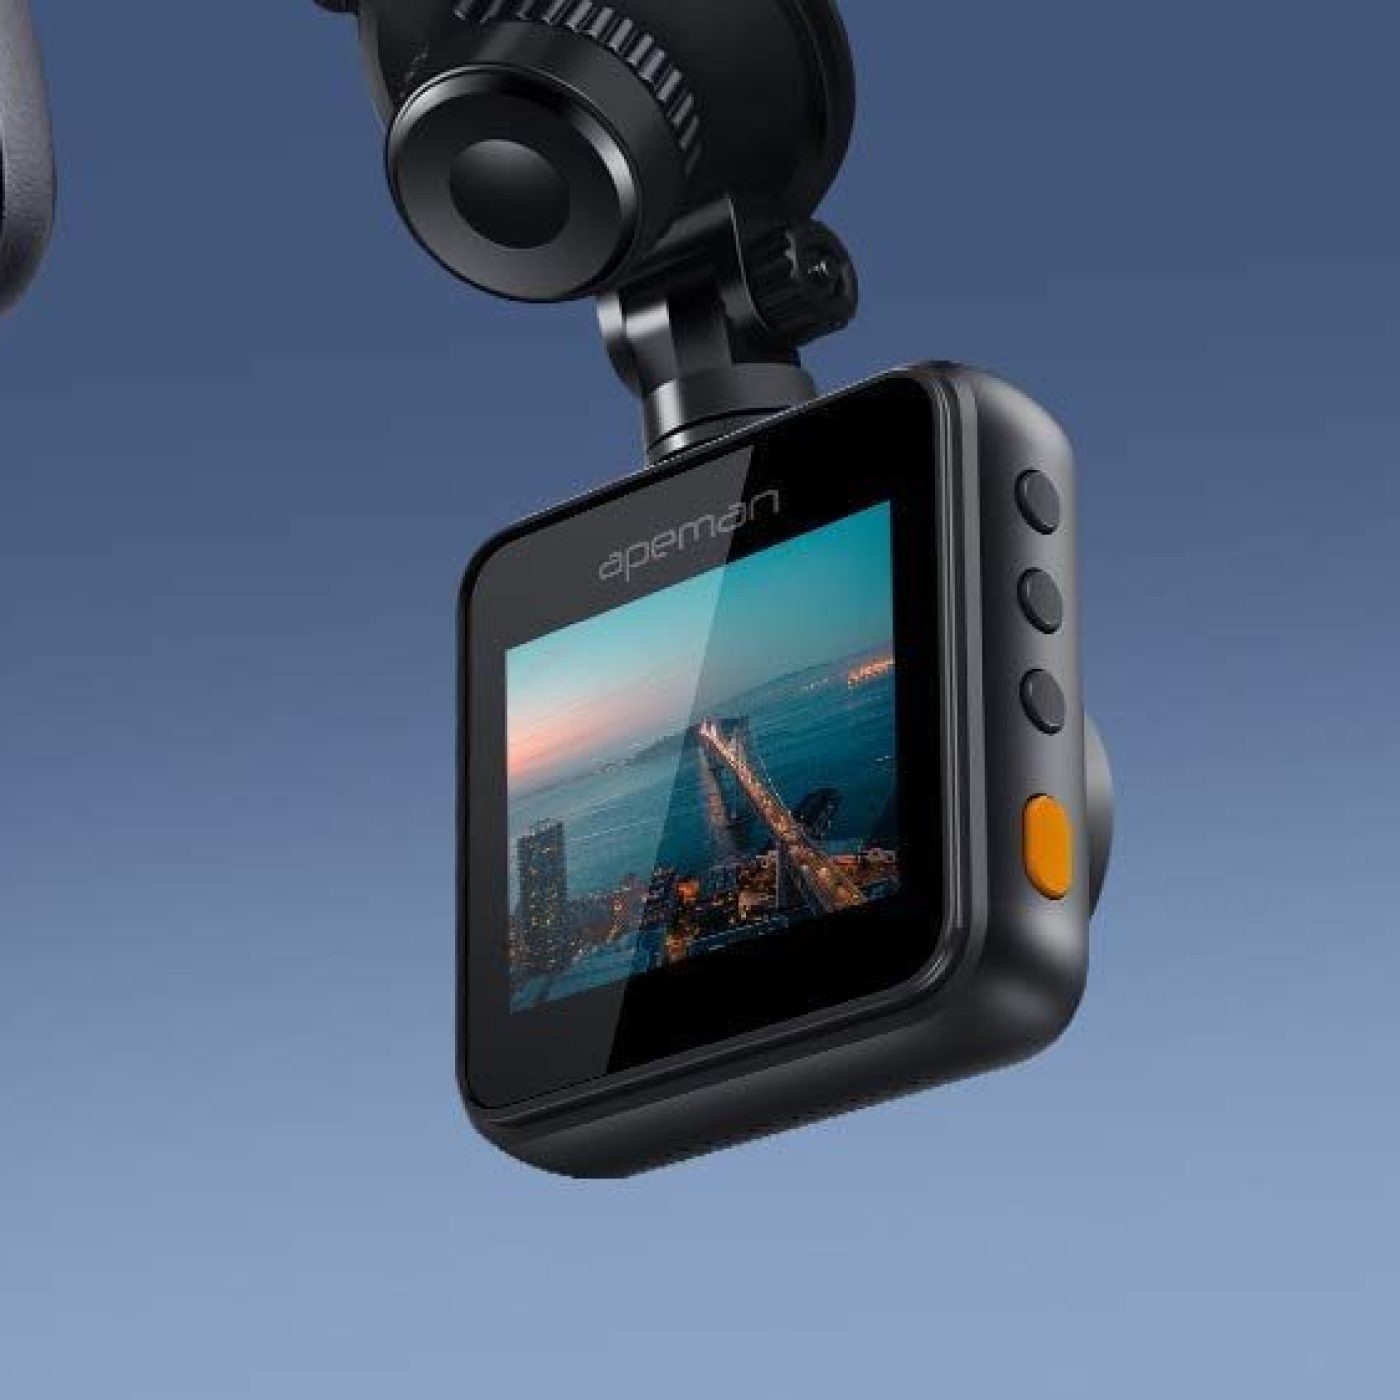 10 Best Dash Cams For Uber & Lyft Drivers 2020 